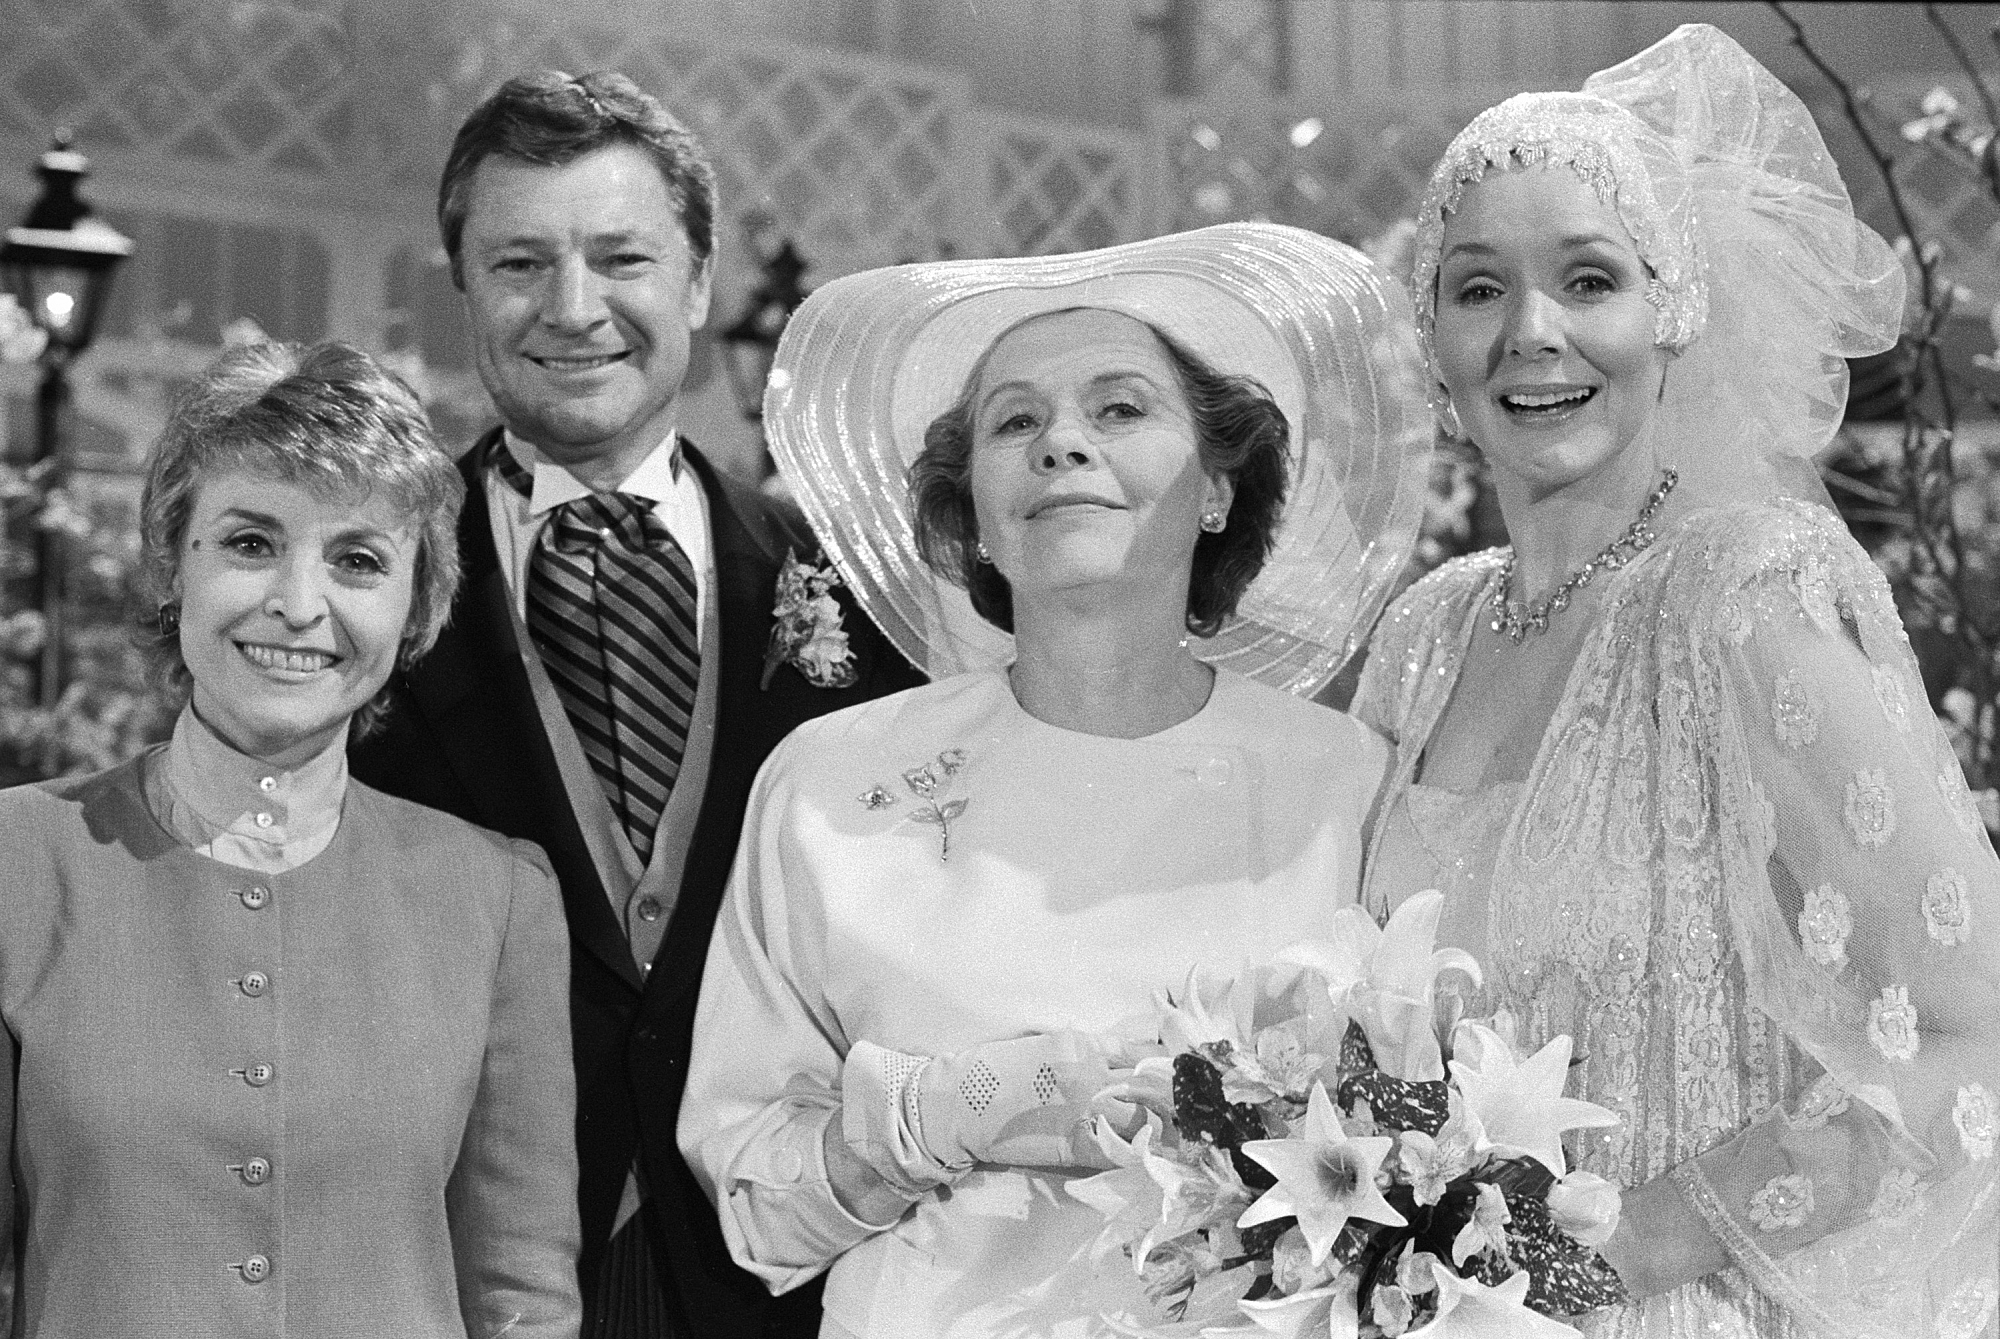 Still of Don Hastings, Kathryn Hays, Rosemary Prinz and Helen Wagner in As the World Turns (1956)